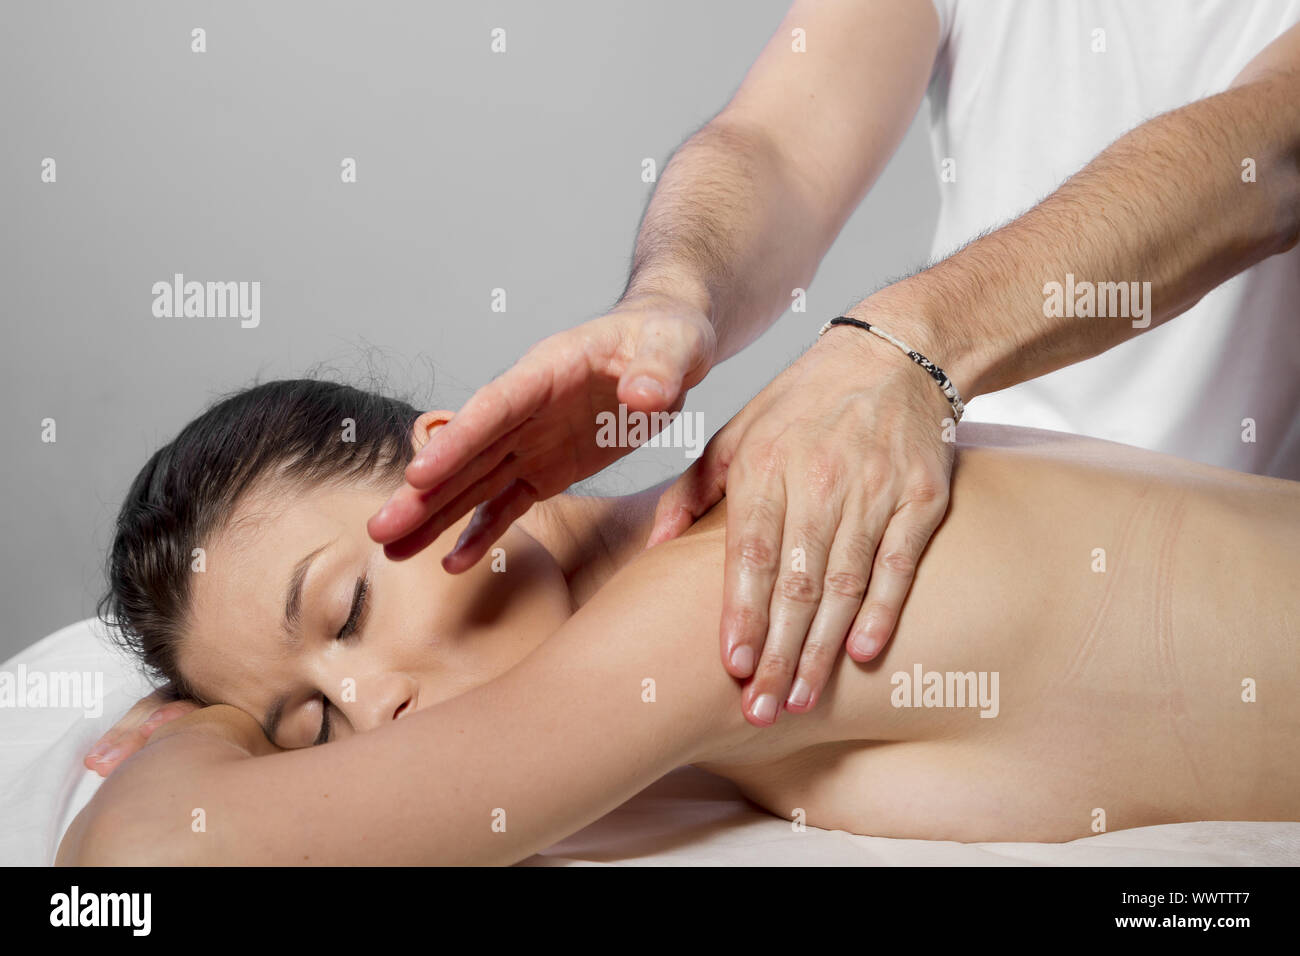 Hands and relaxation, beautiful brunette woman relaxing on a stretcher receiving a therapeutic massage from hands of a professio Stock Photo